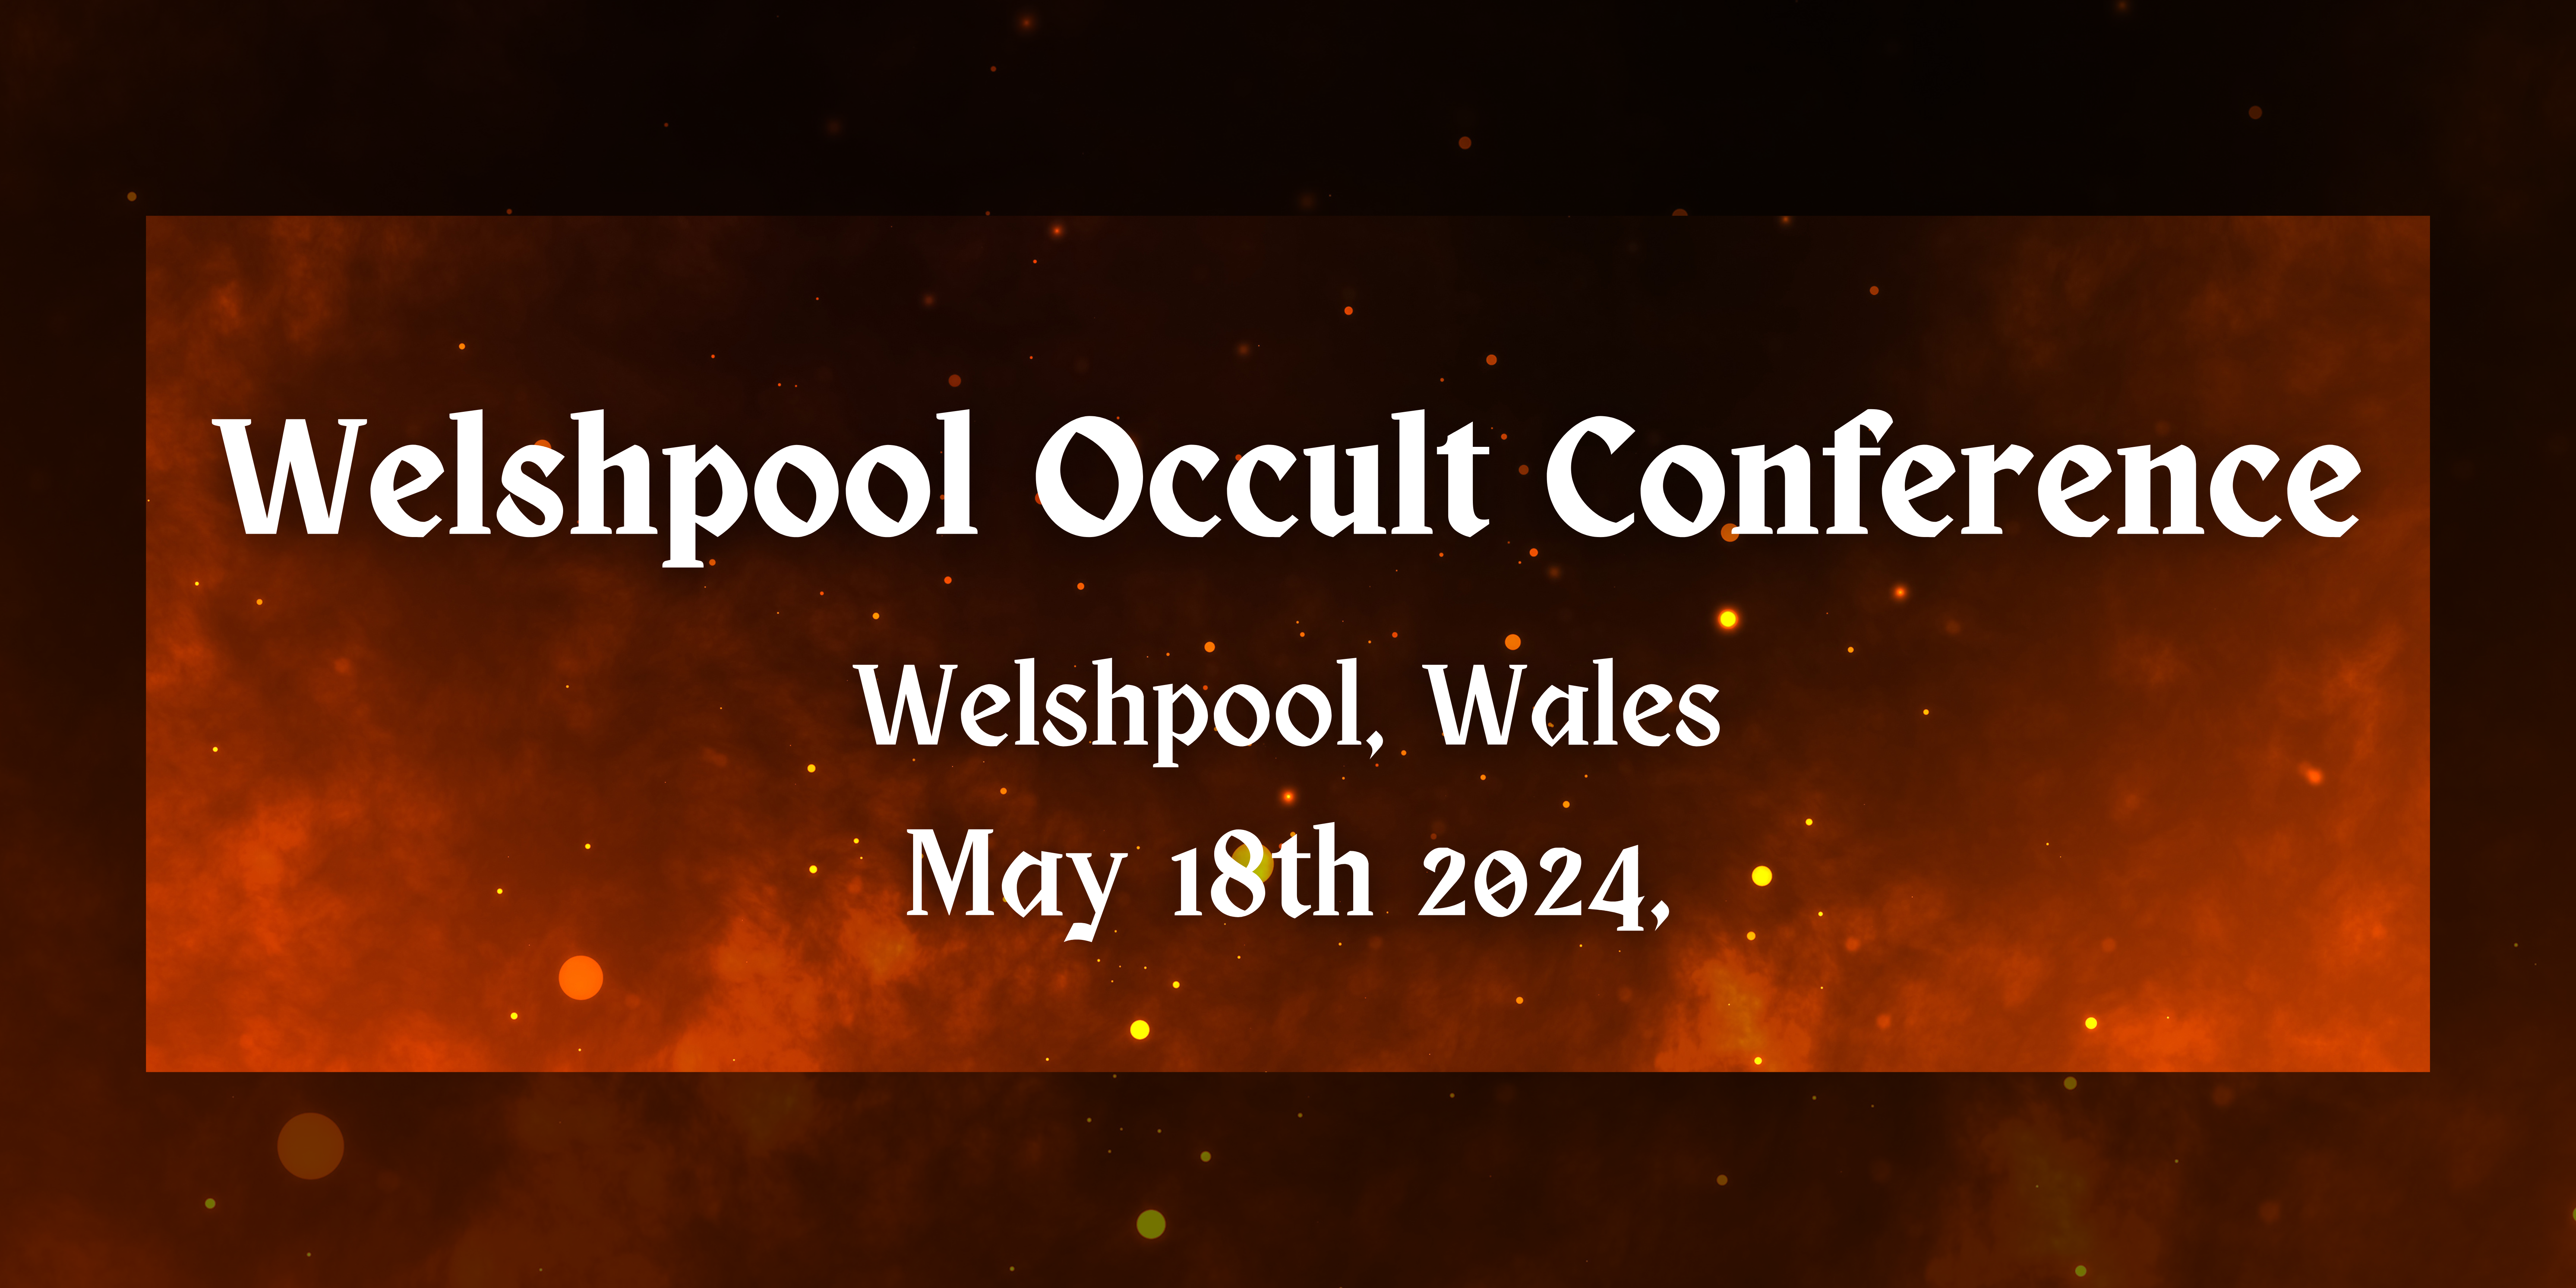 Welshpool Occult Conference